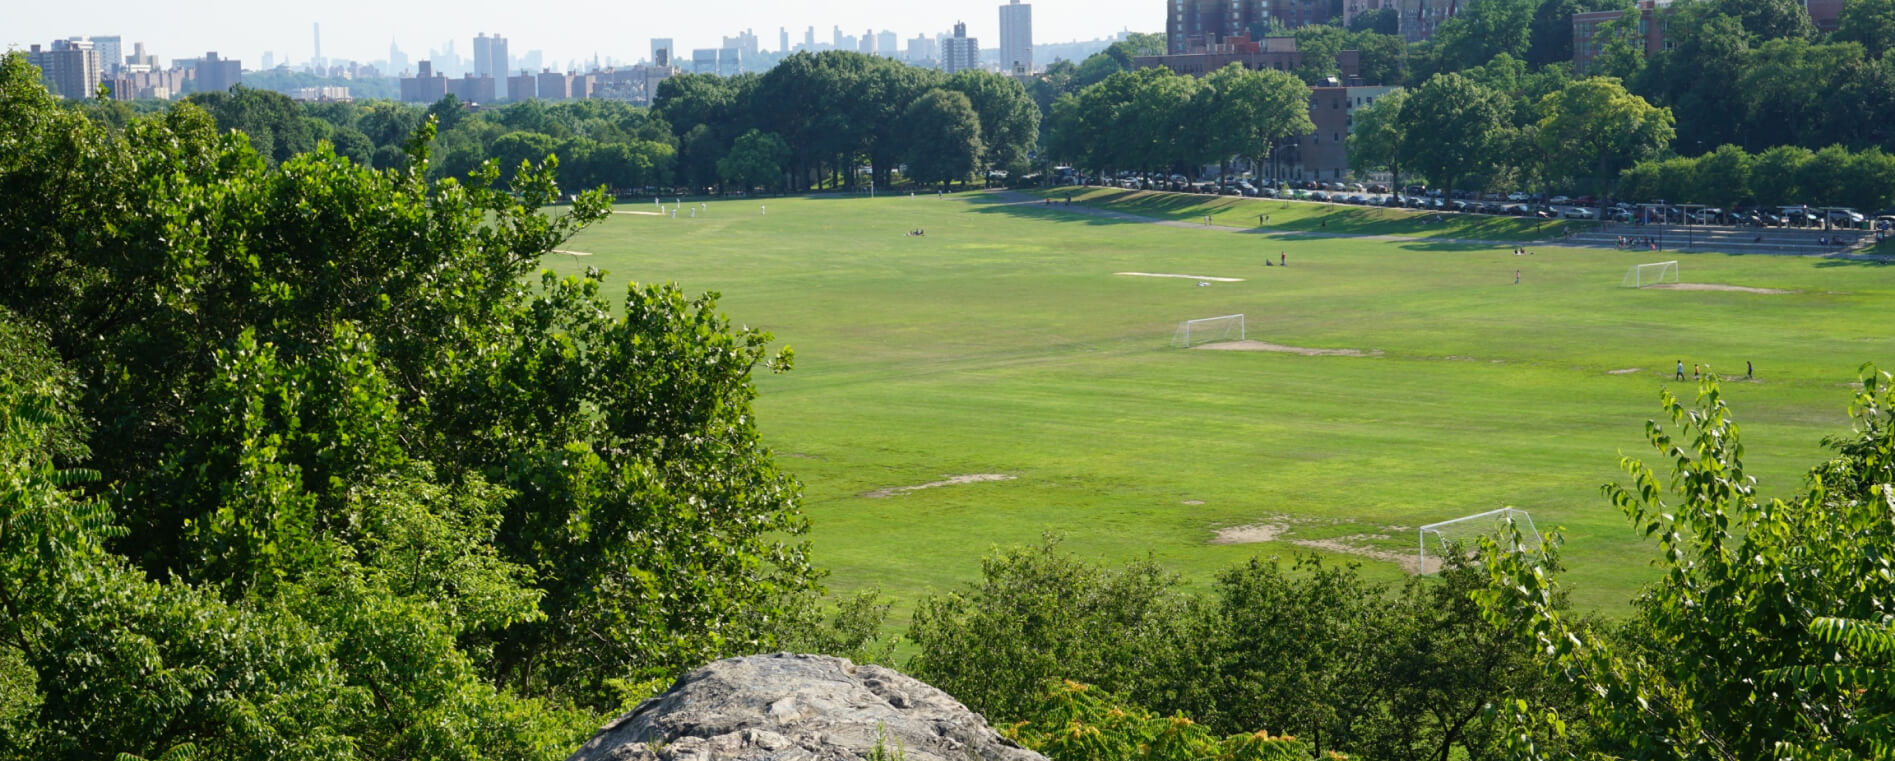 NYC Parks: 9 Underrated Green Spaces in the City